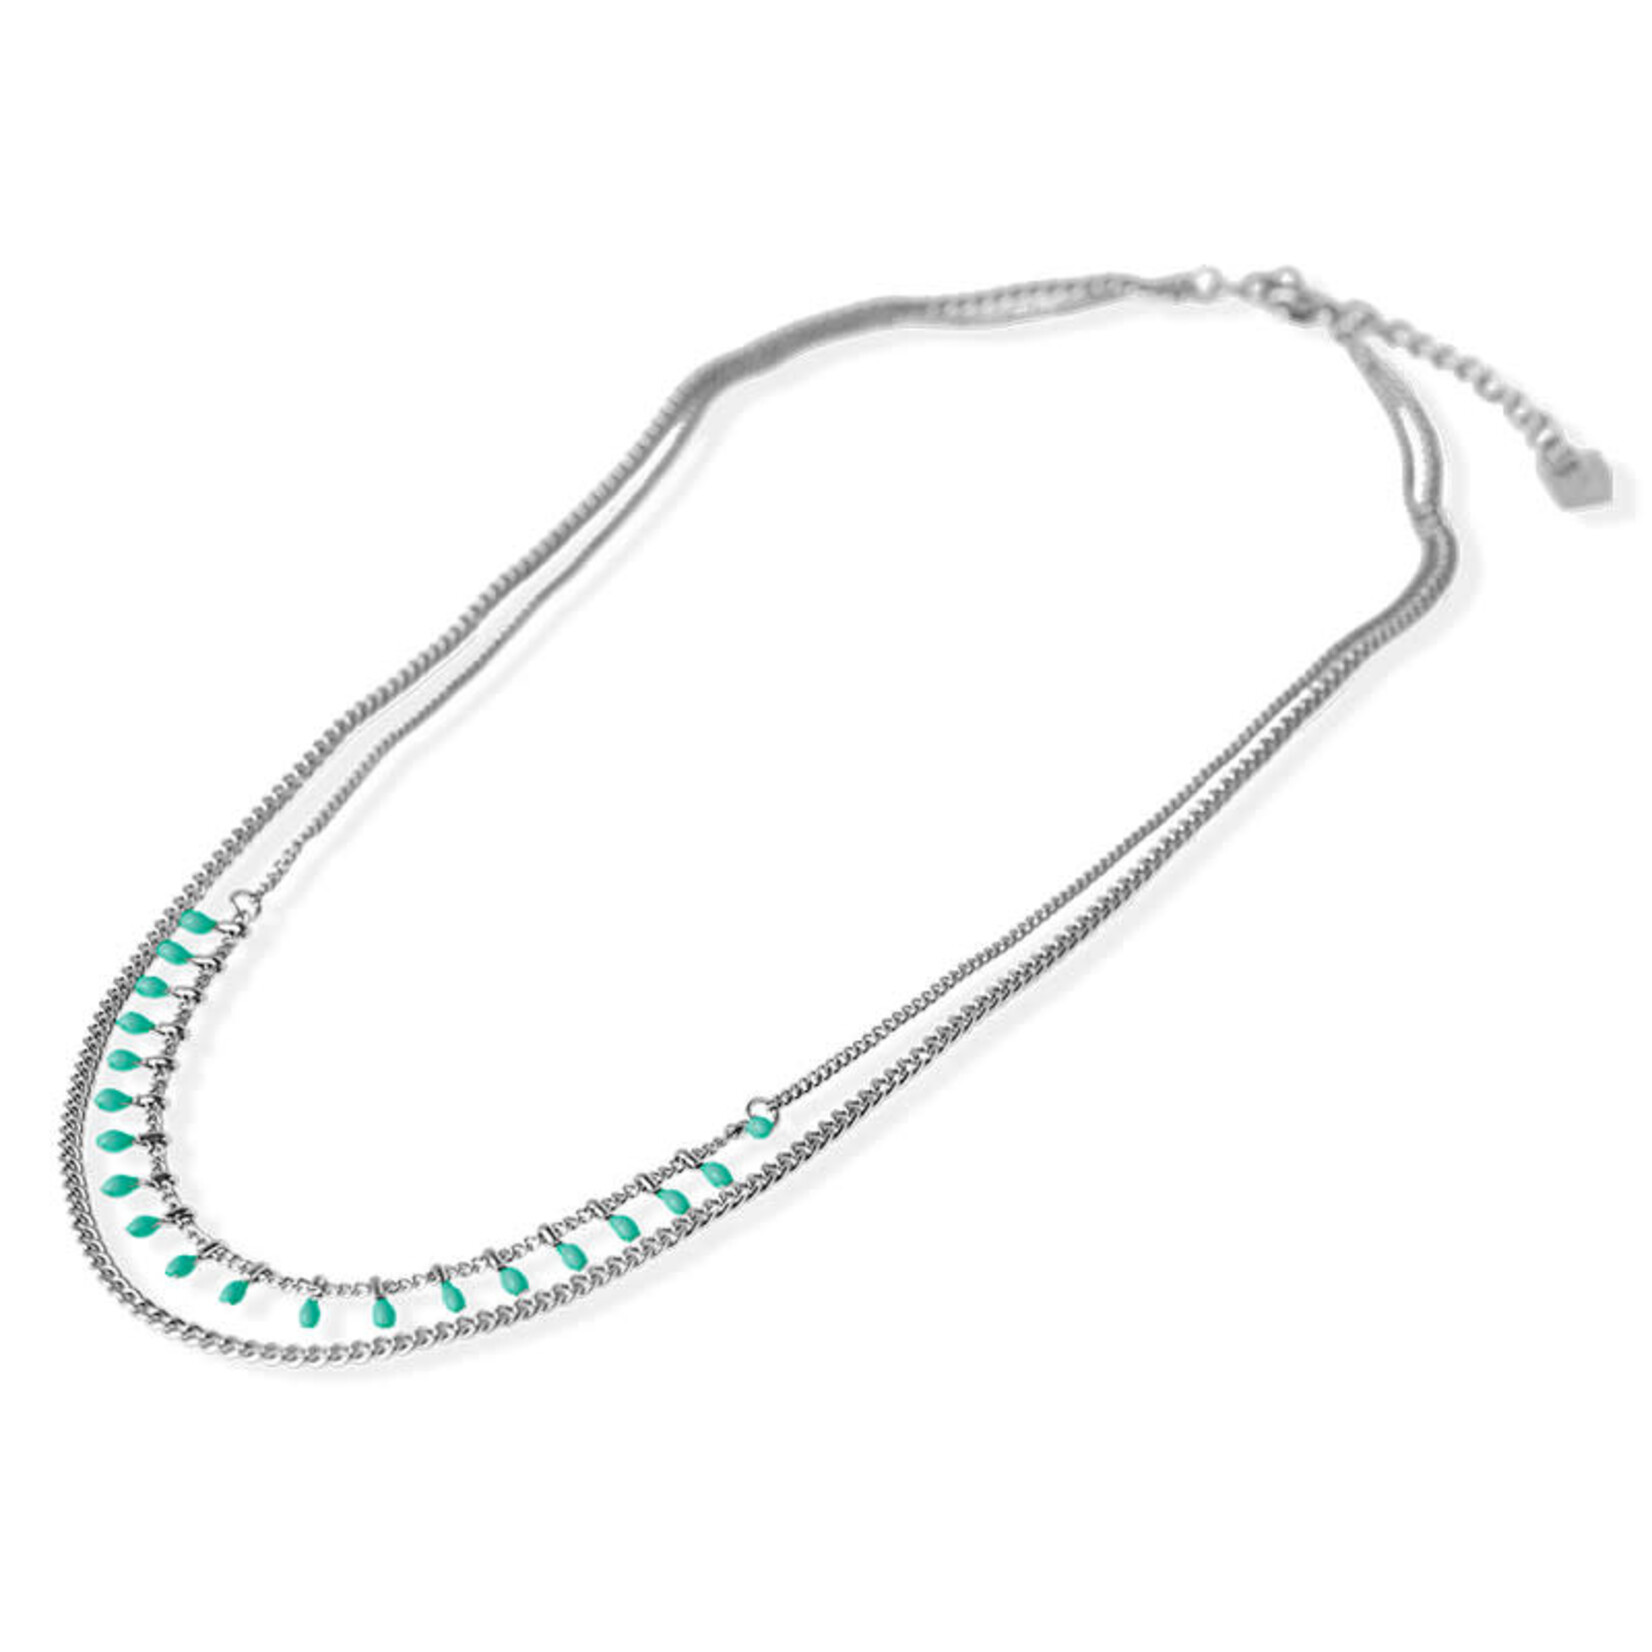 FAB Accessories Turquoise Drop Ball & Chain Necklace -